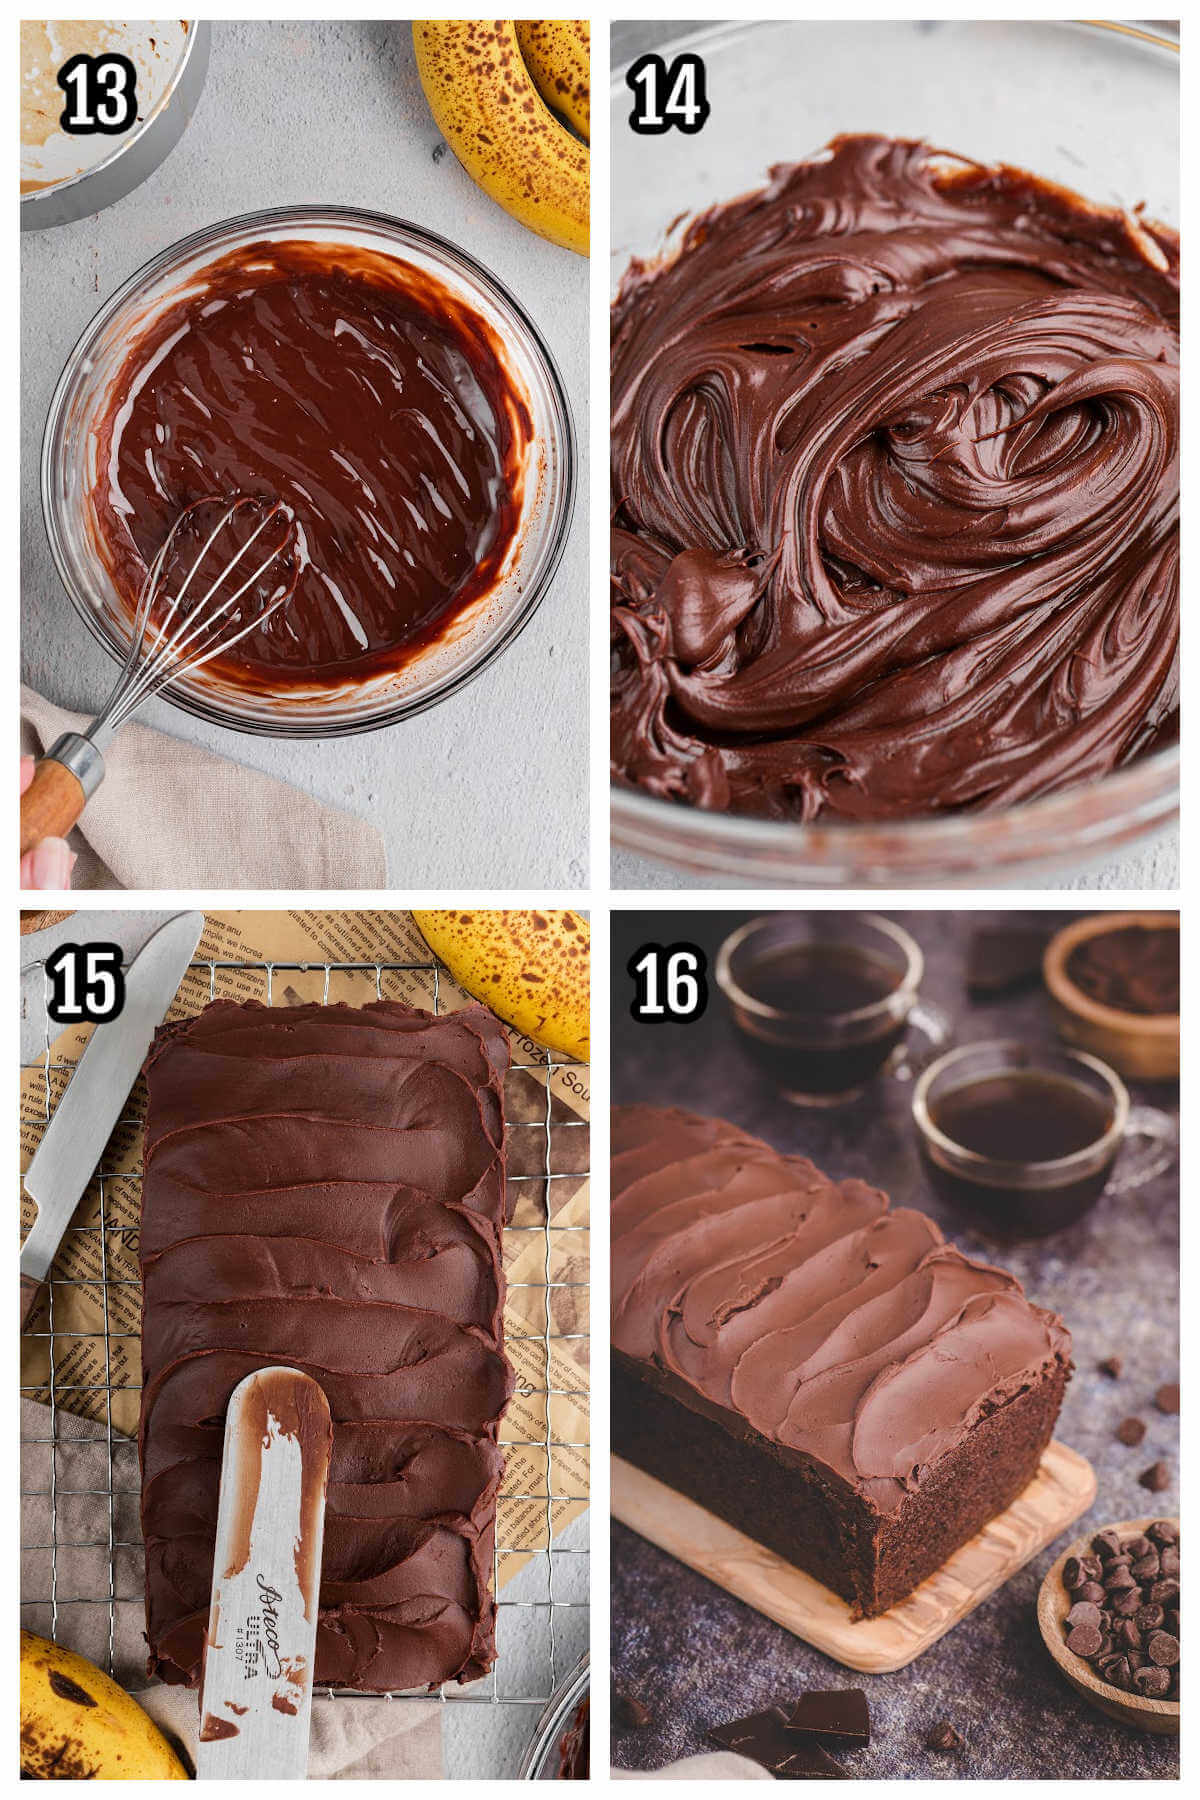 The fourth and final four steps to icing the banana chocolate cake with espresso chocolate ganache. 